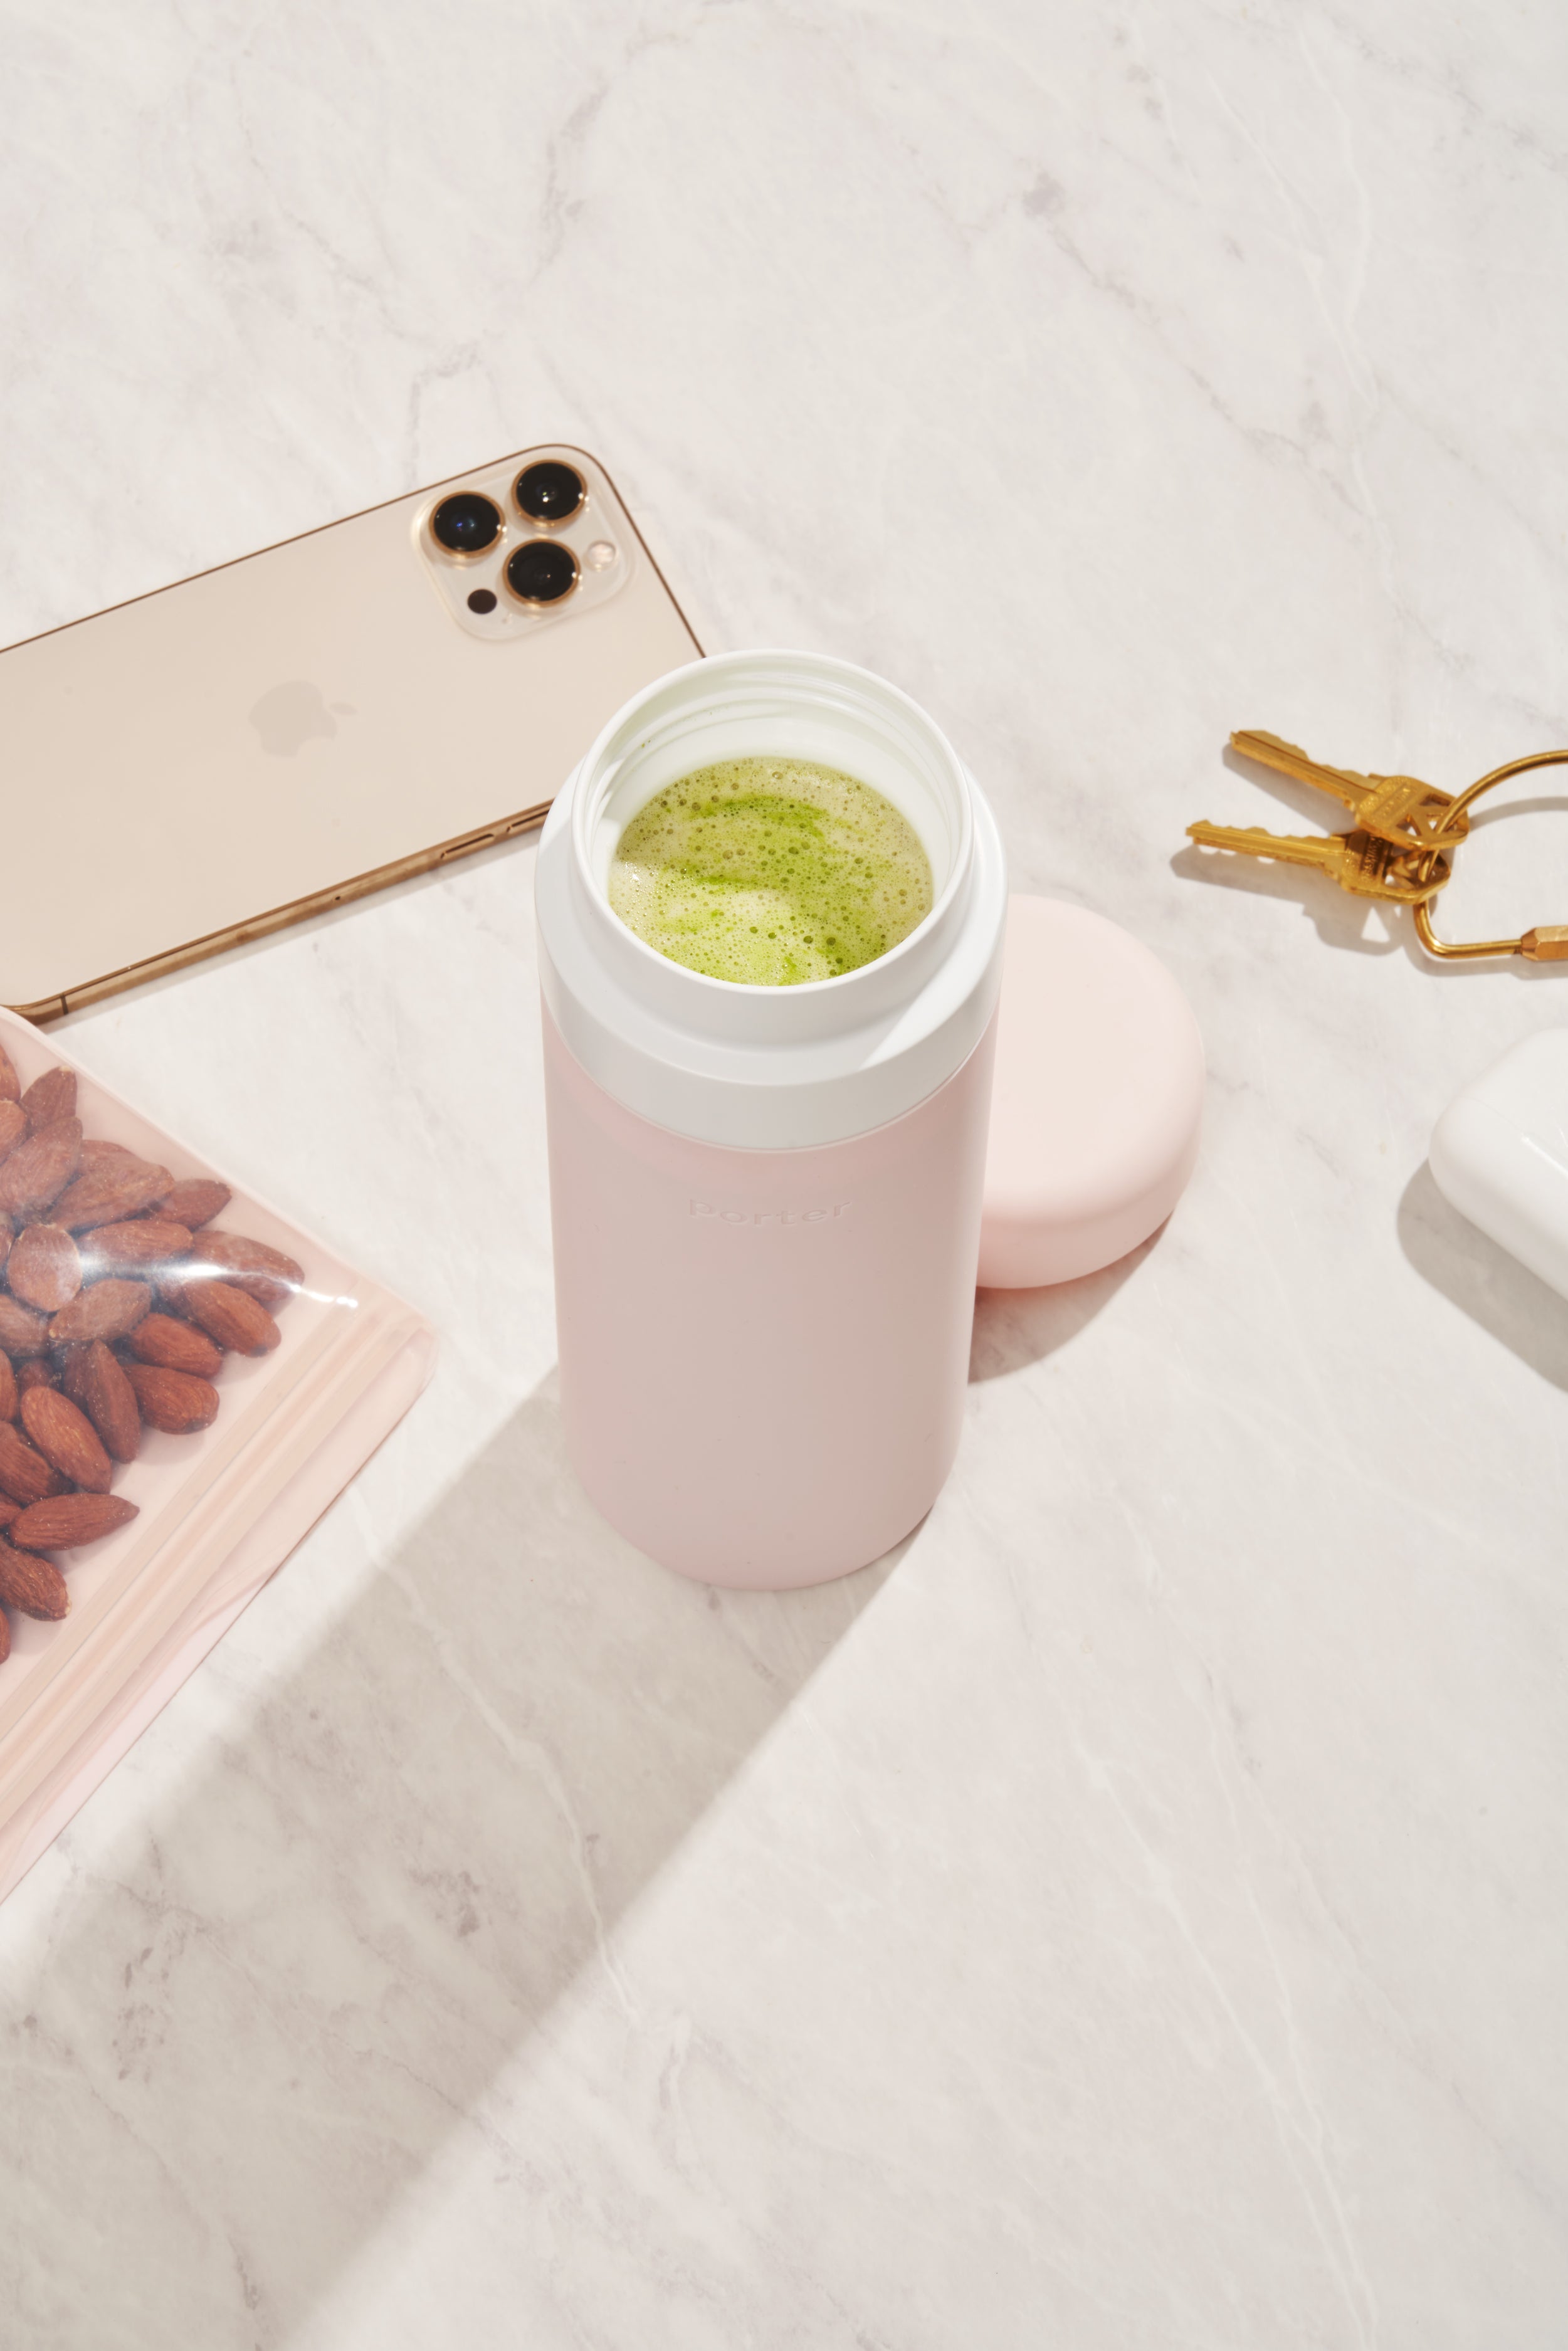 Blush wide mouth ceramic Porter waterbottle with green matcha latte inside. Phone, keys, and bag of almonds on counter. 